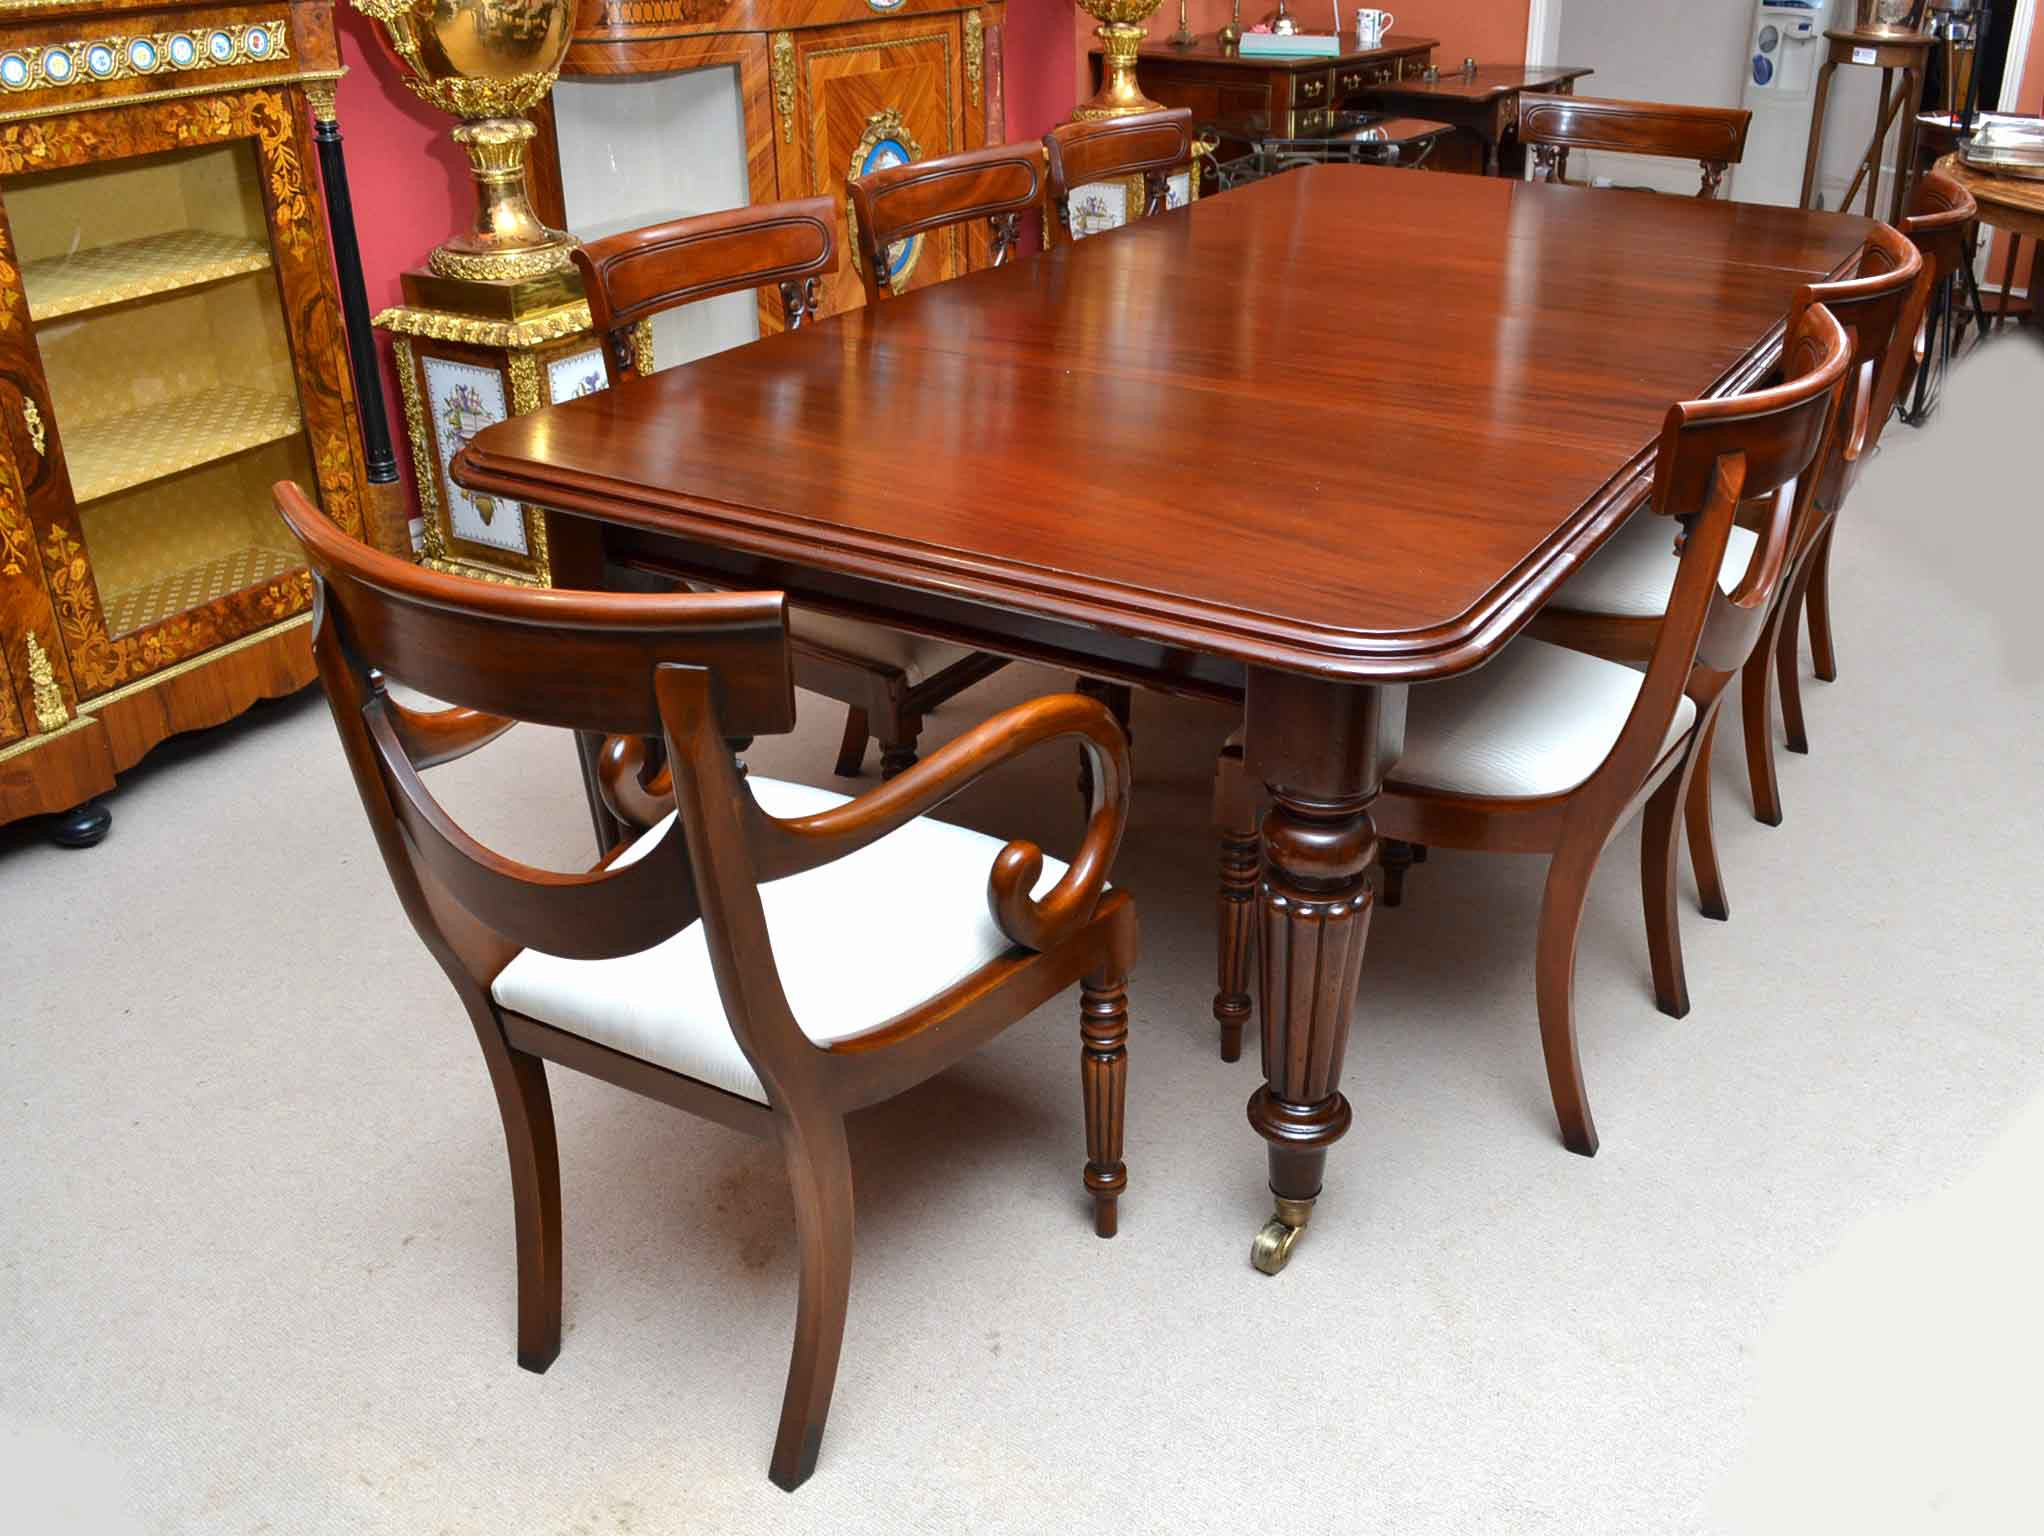 8 Chair Dinner Table
 Antique Victorian 8 ft Mahogany Dining Table & 8 Chairs